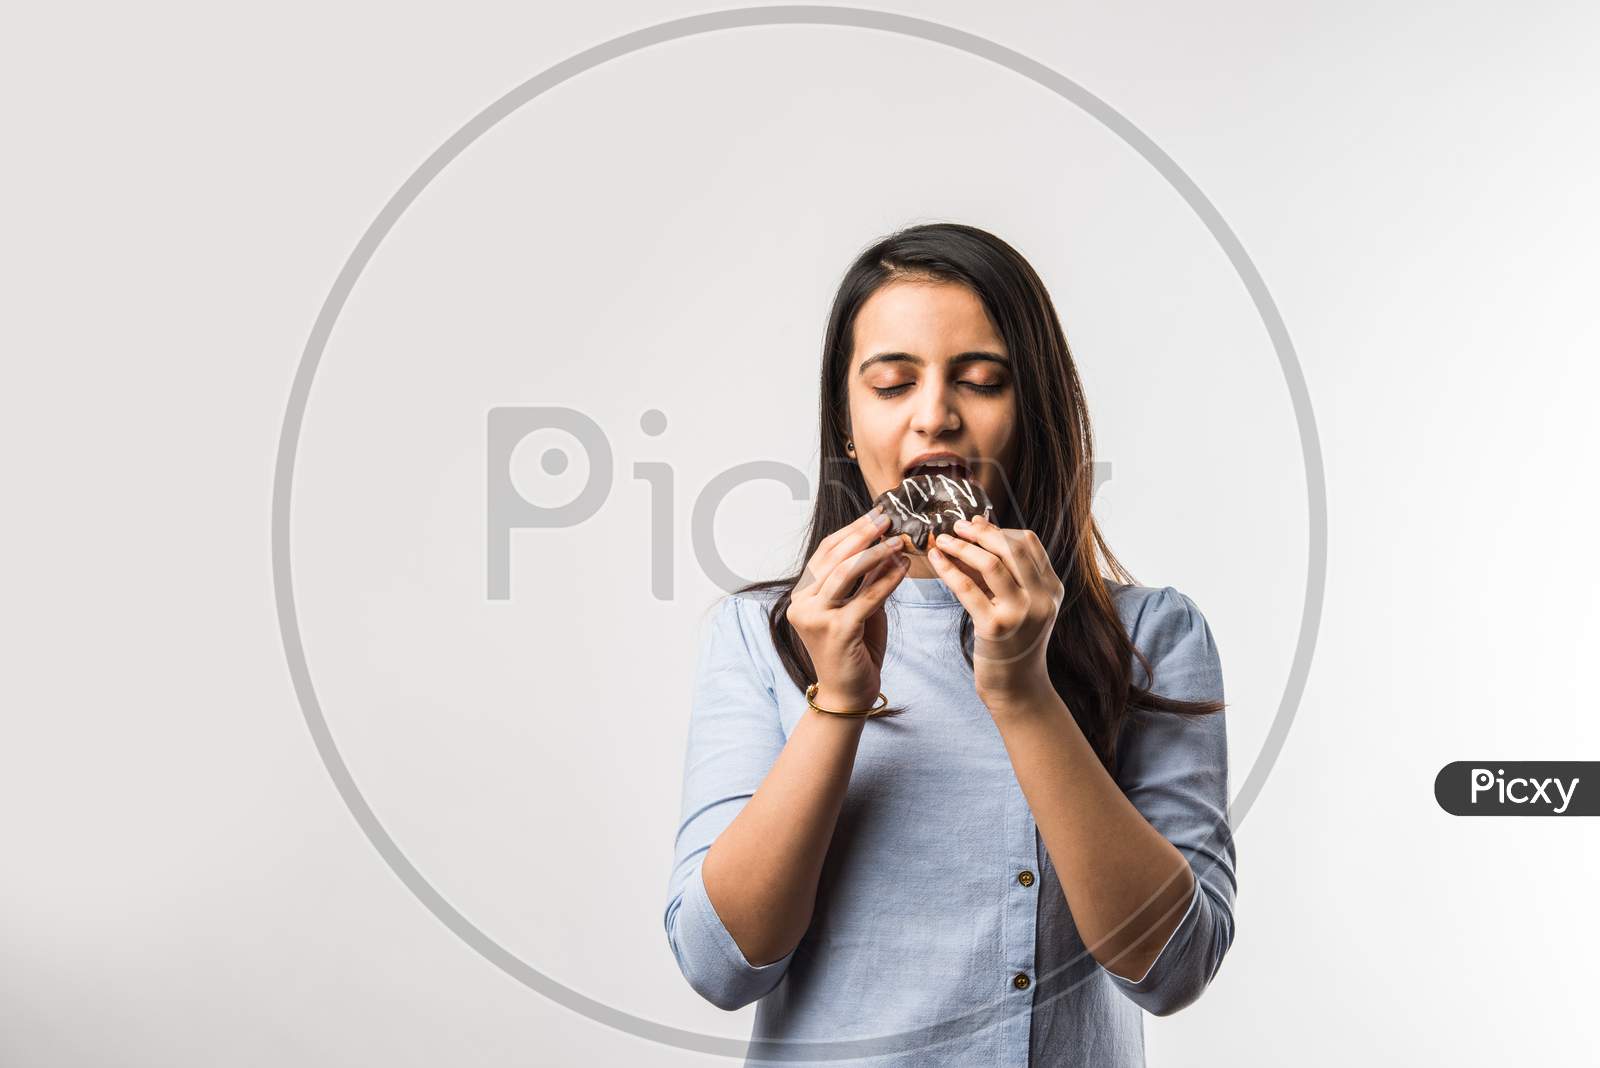 Indian Girl Eating Chocolate Donut, Isolated Over White Background